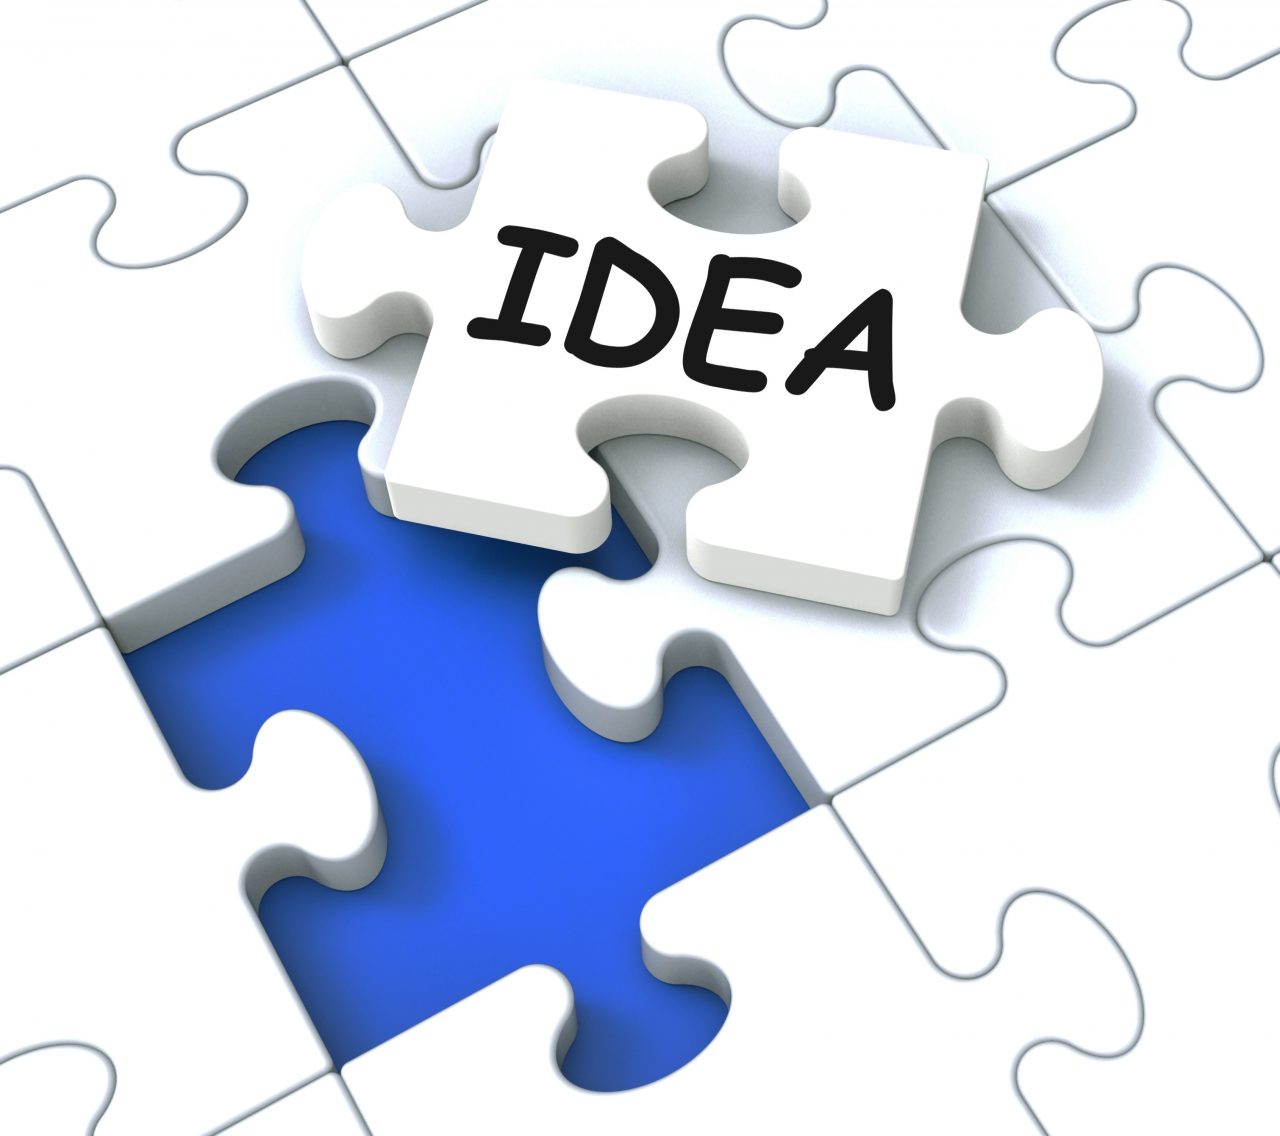 Idea Puzzle Showing Creative Innovations